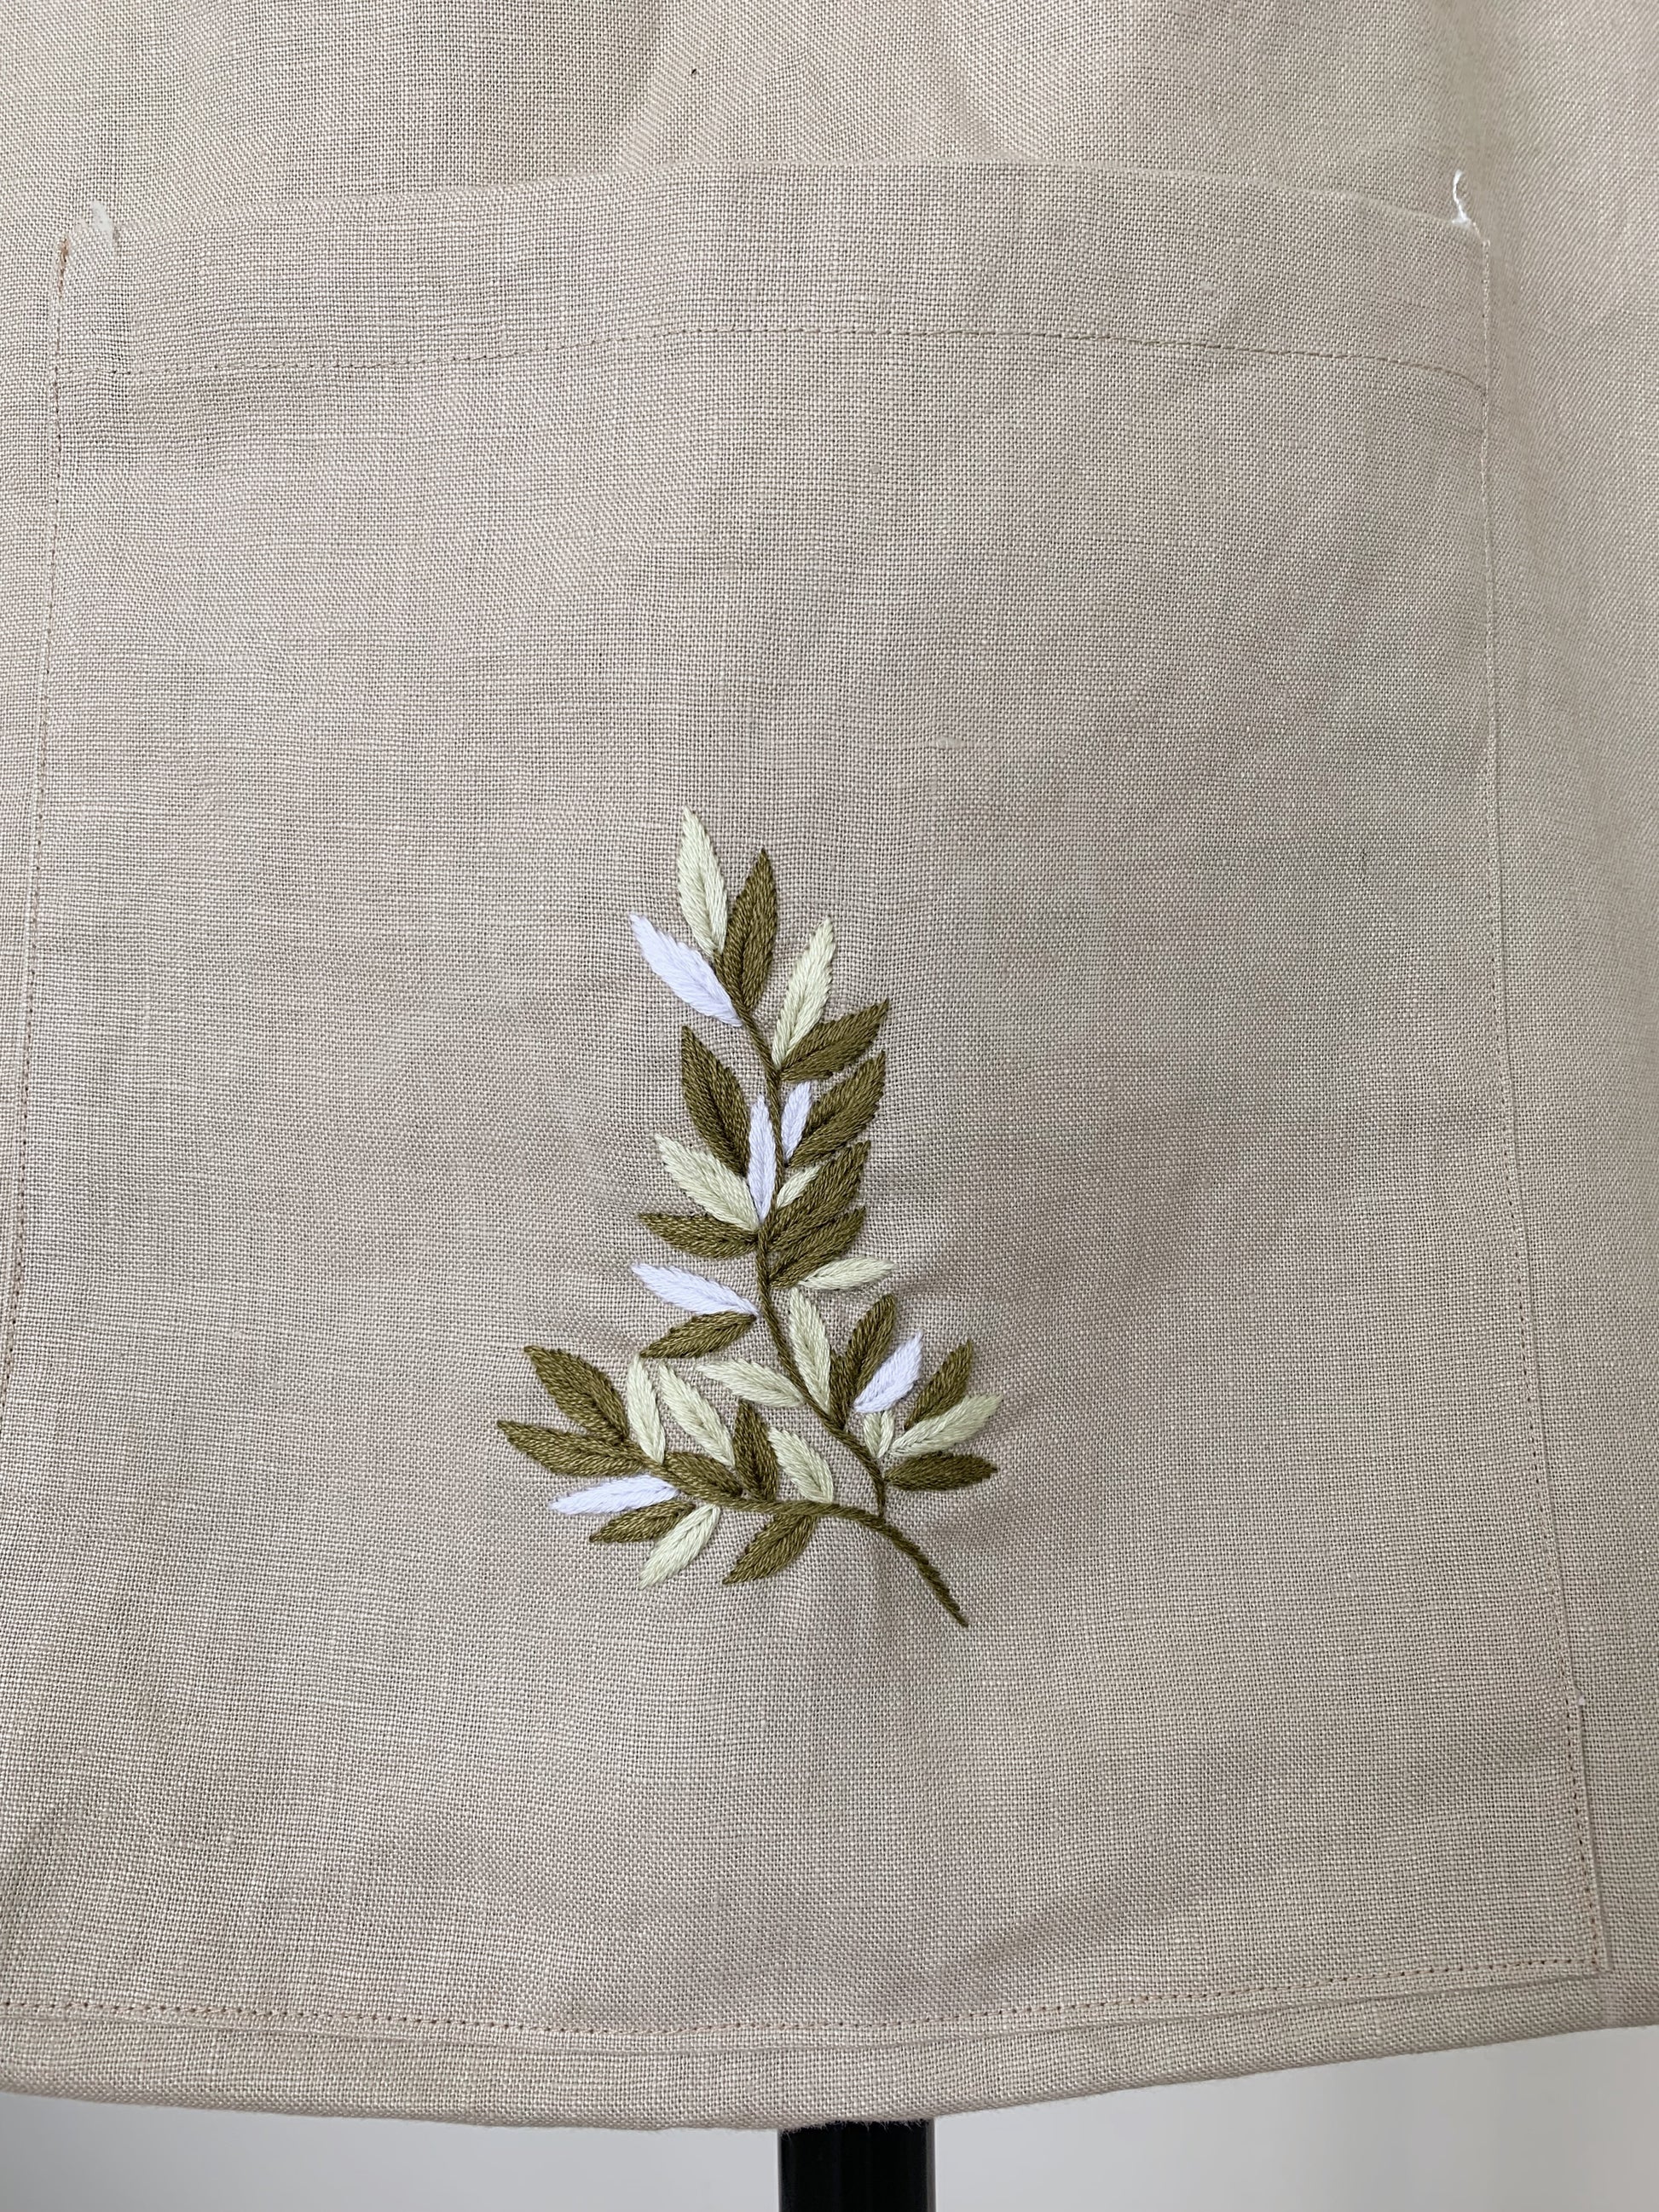 Linen Canvas Tote Bag with Hand Embroidery Leaf